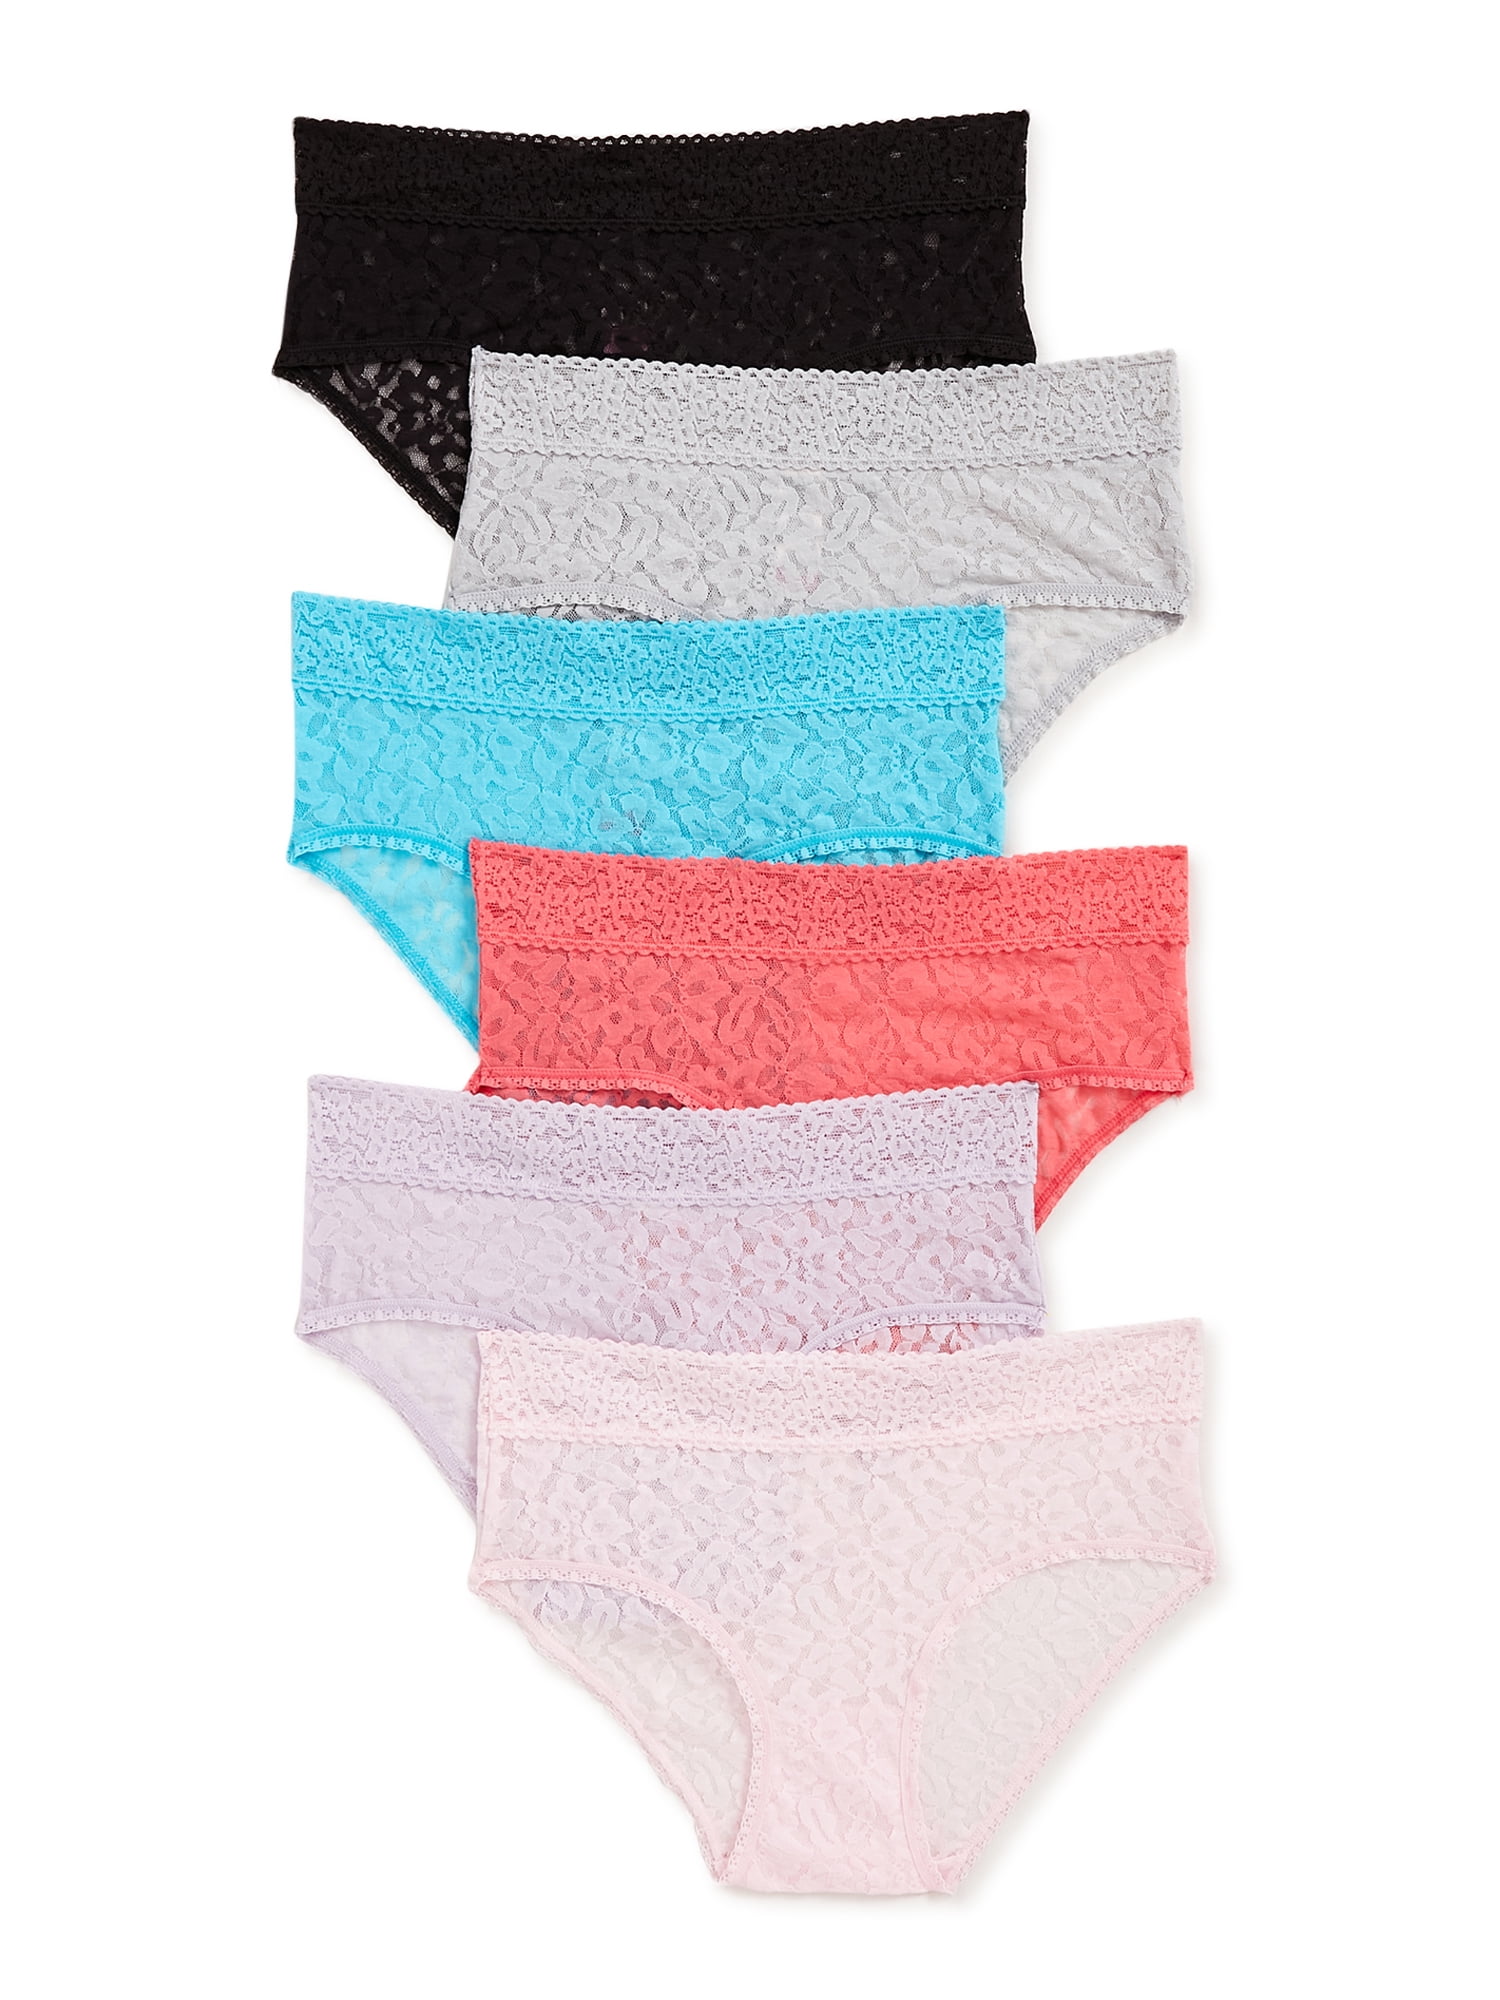 Secret Treasures Women's Lace Stretch Hipster Panties, 6-Pack